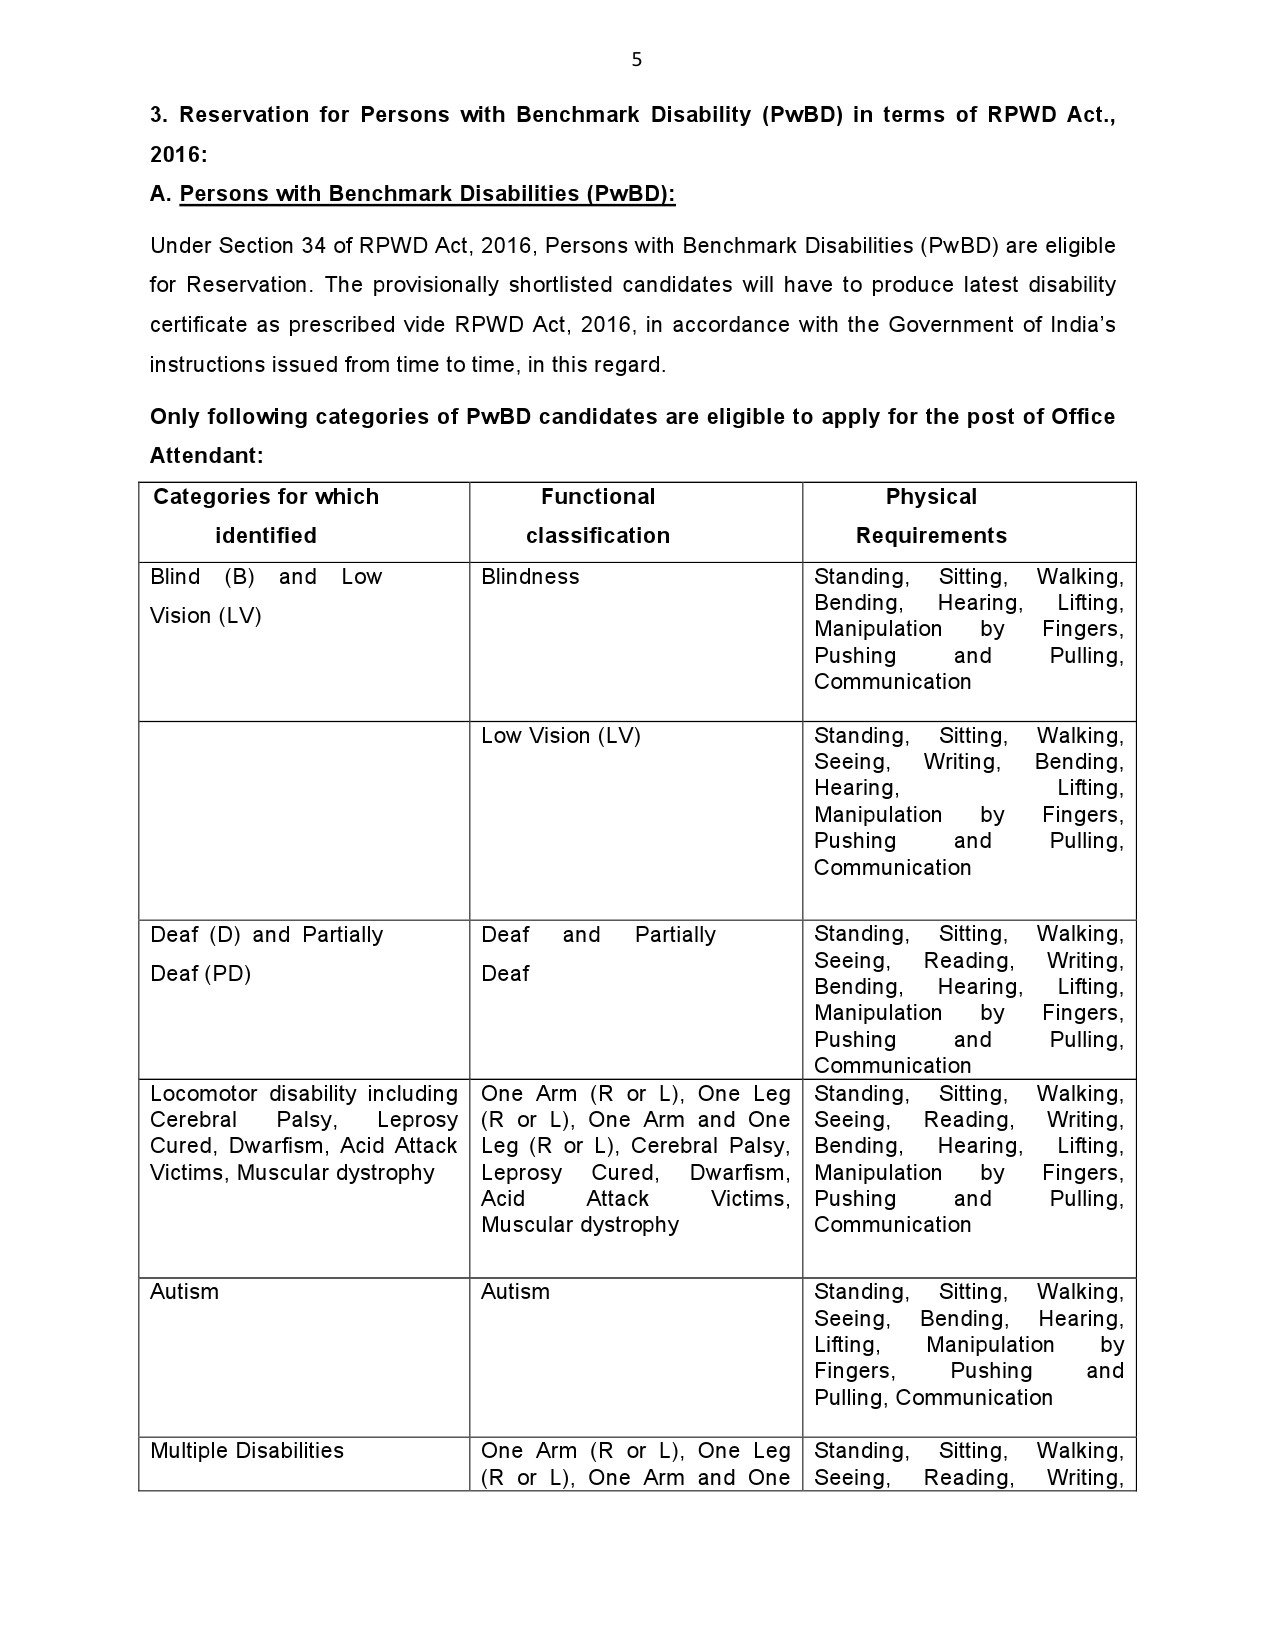 RECRUITMENT FOR THE POST OF OFFICE ATTENDANTS 2020 - Notification Image 5